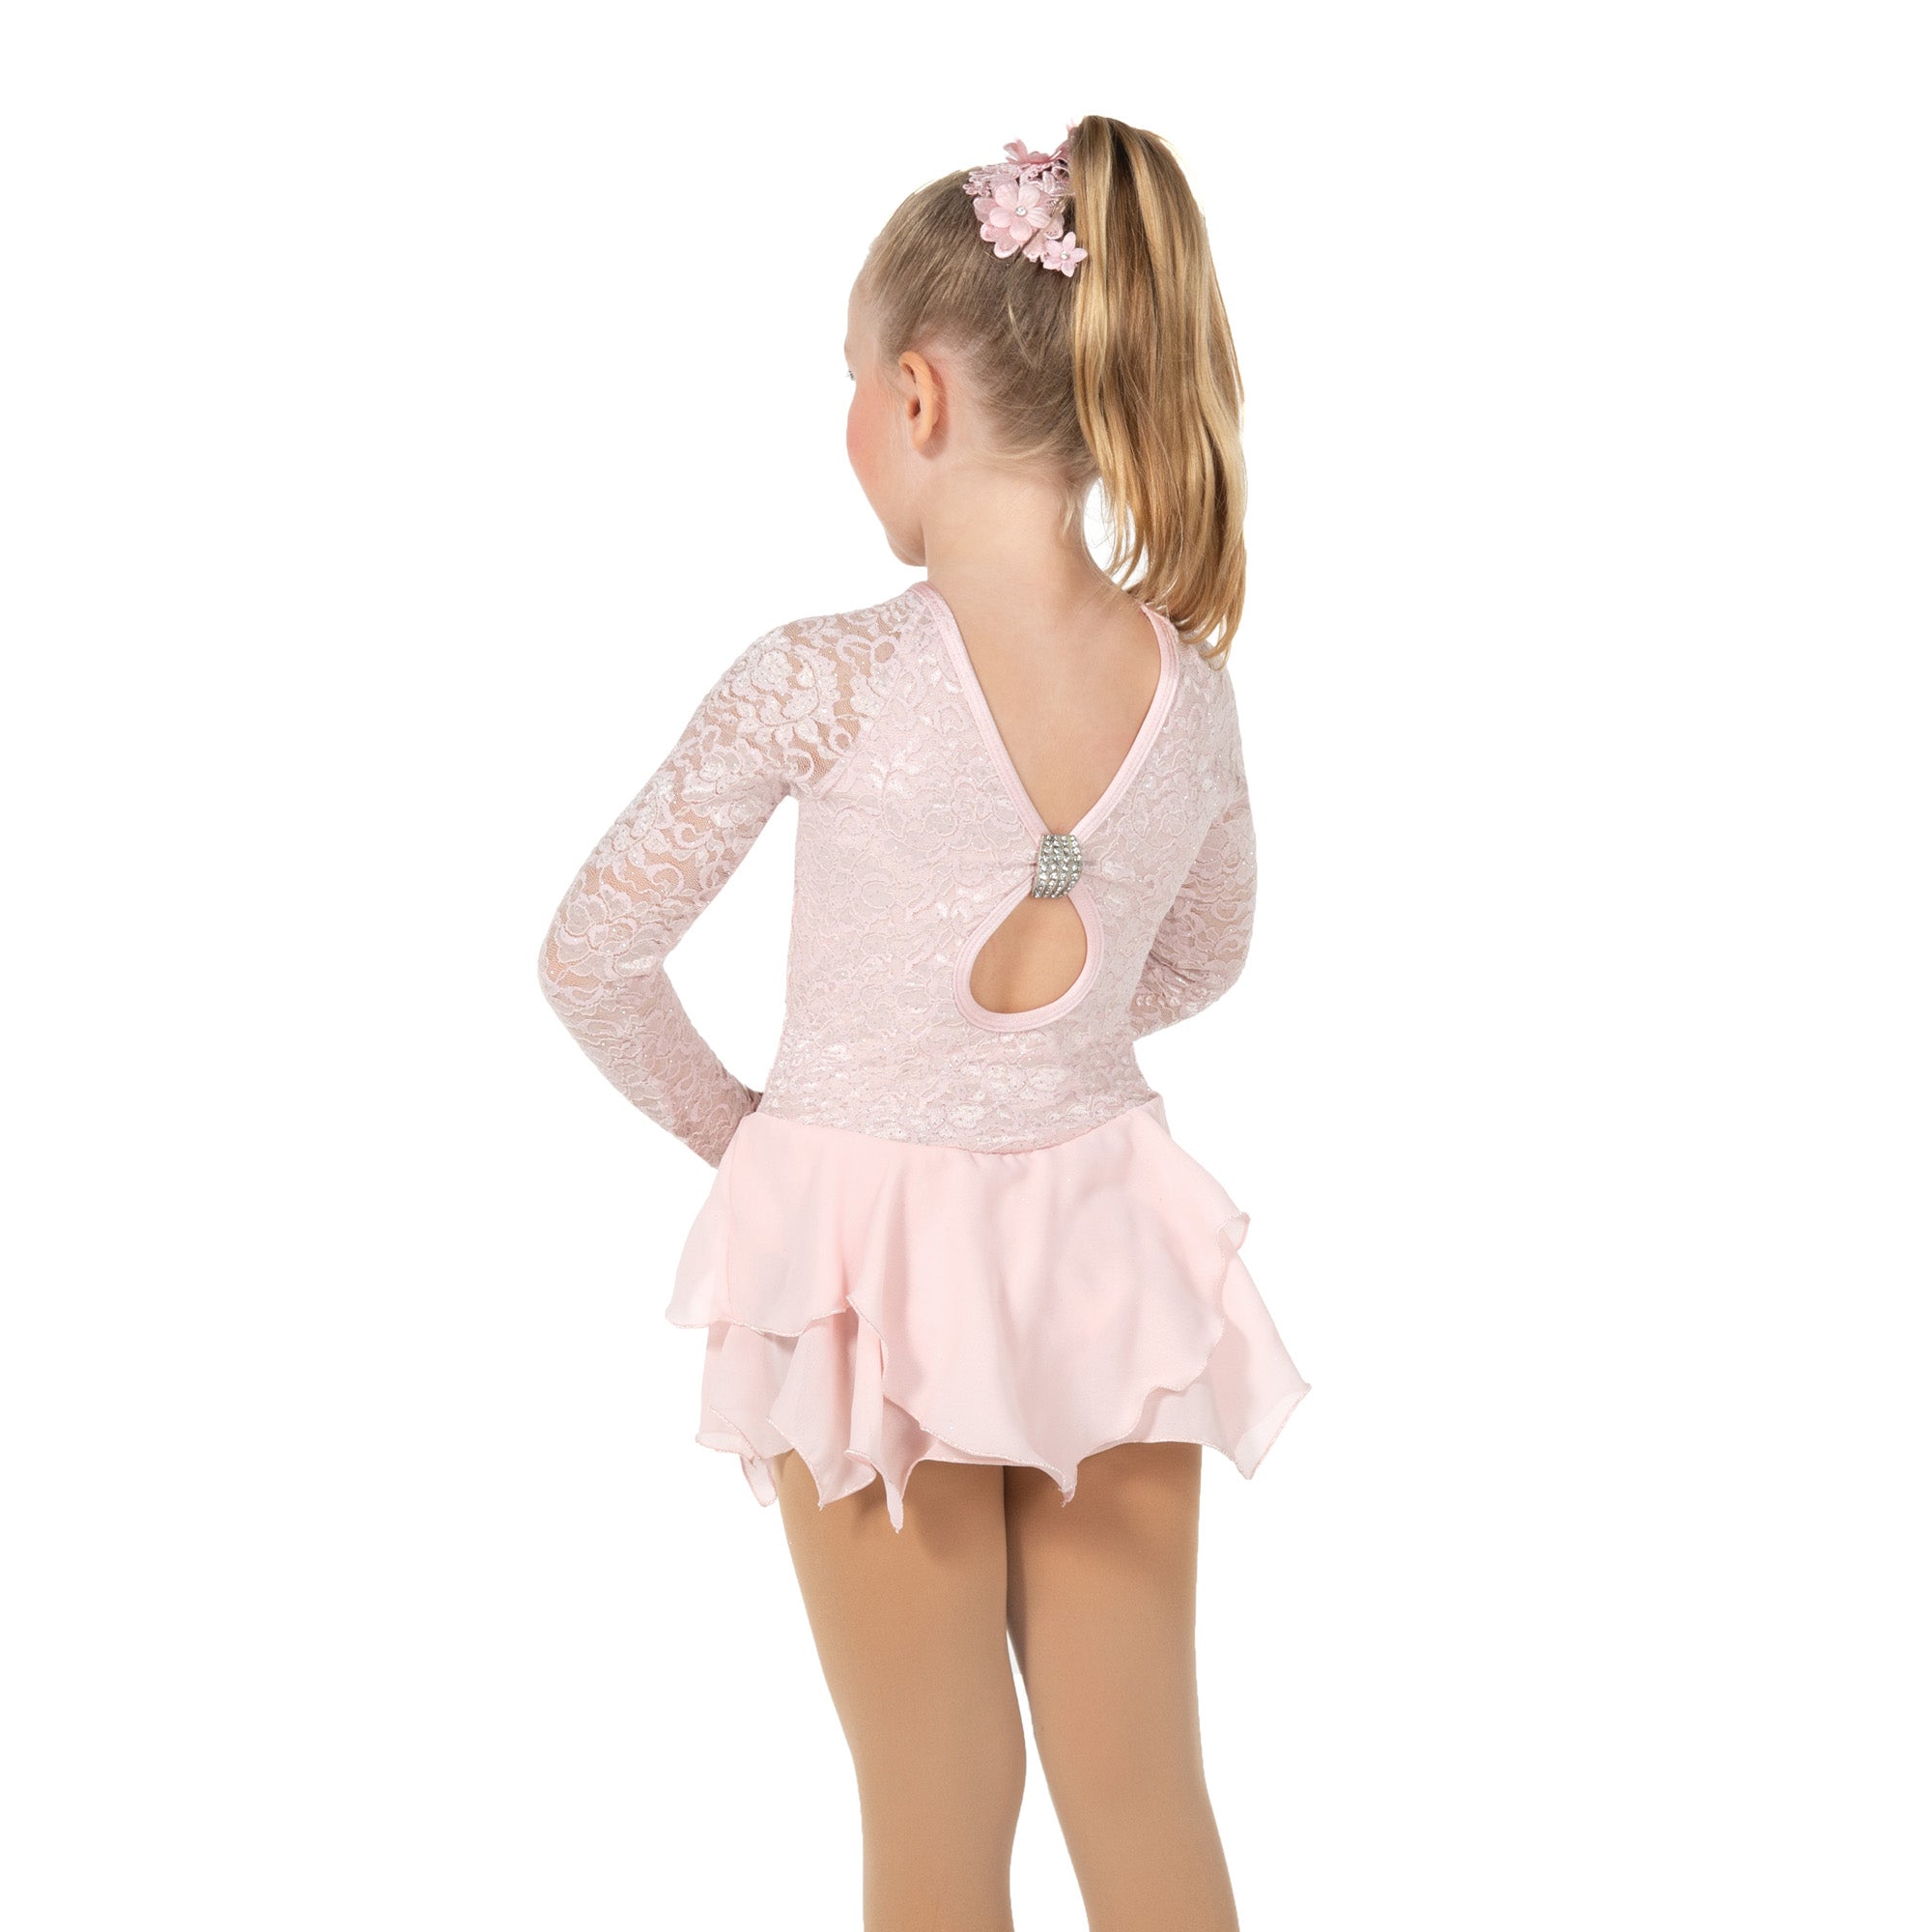 623 Tulip Lace Skating Dress in Pink by Jerry's